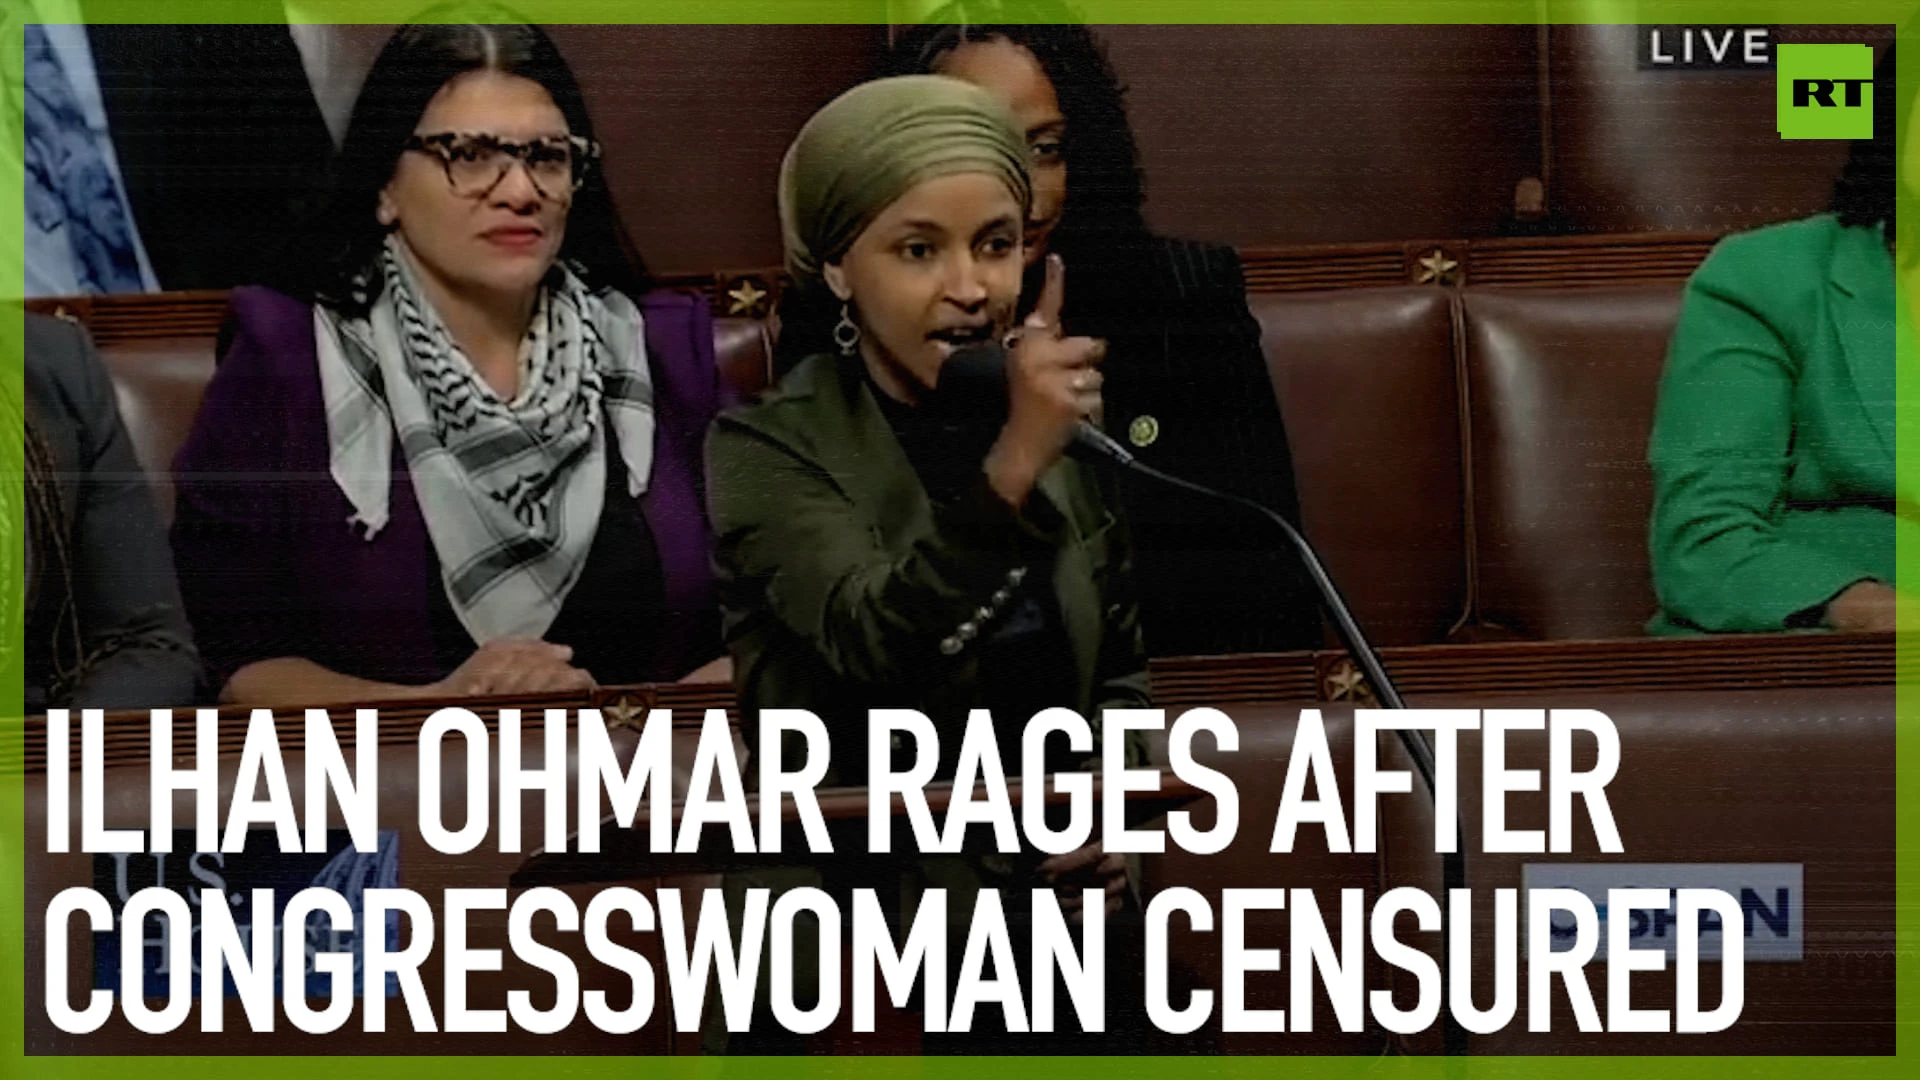 Ilhan Ohmar rages after congresswoman censured